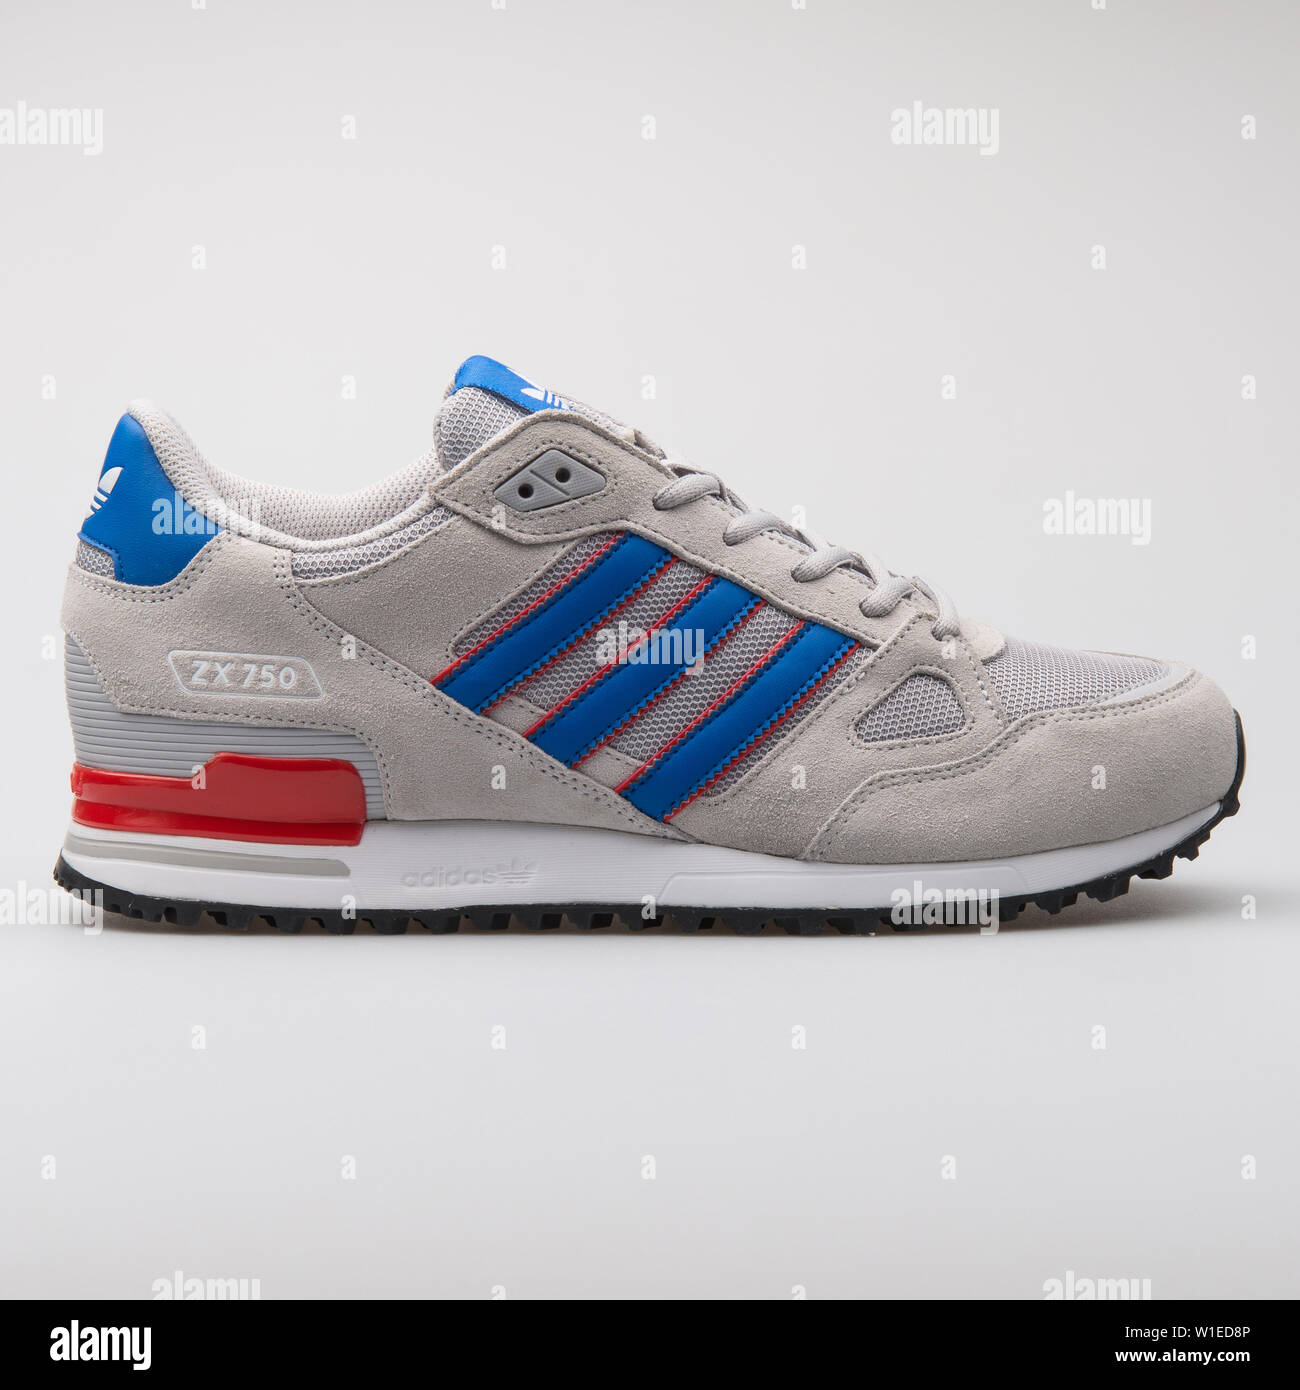 VIENNA, AUSTRIA - AUGUST 7, 2017: Adidas ZX750 grey, blue and red sneaker  on white background Stock Photo - Alamy